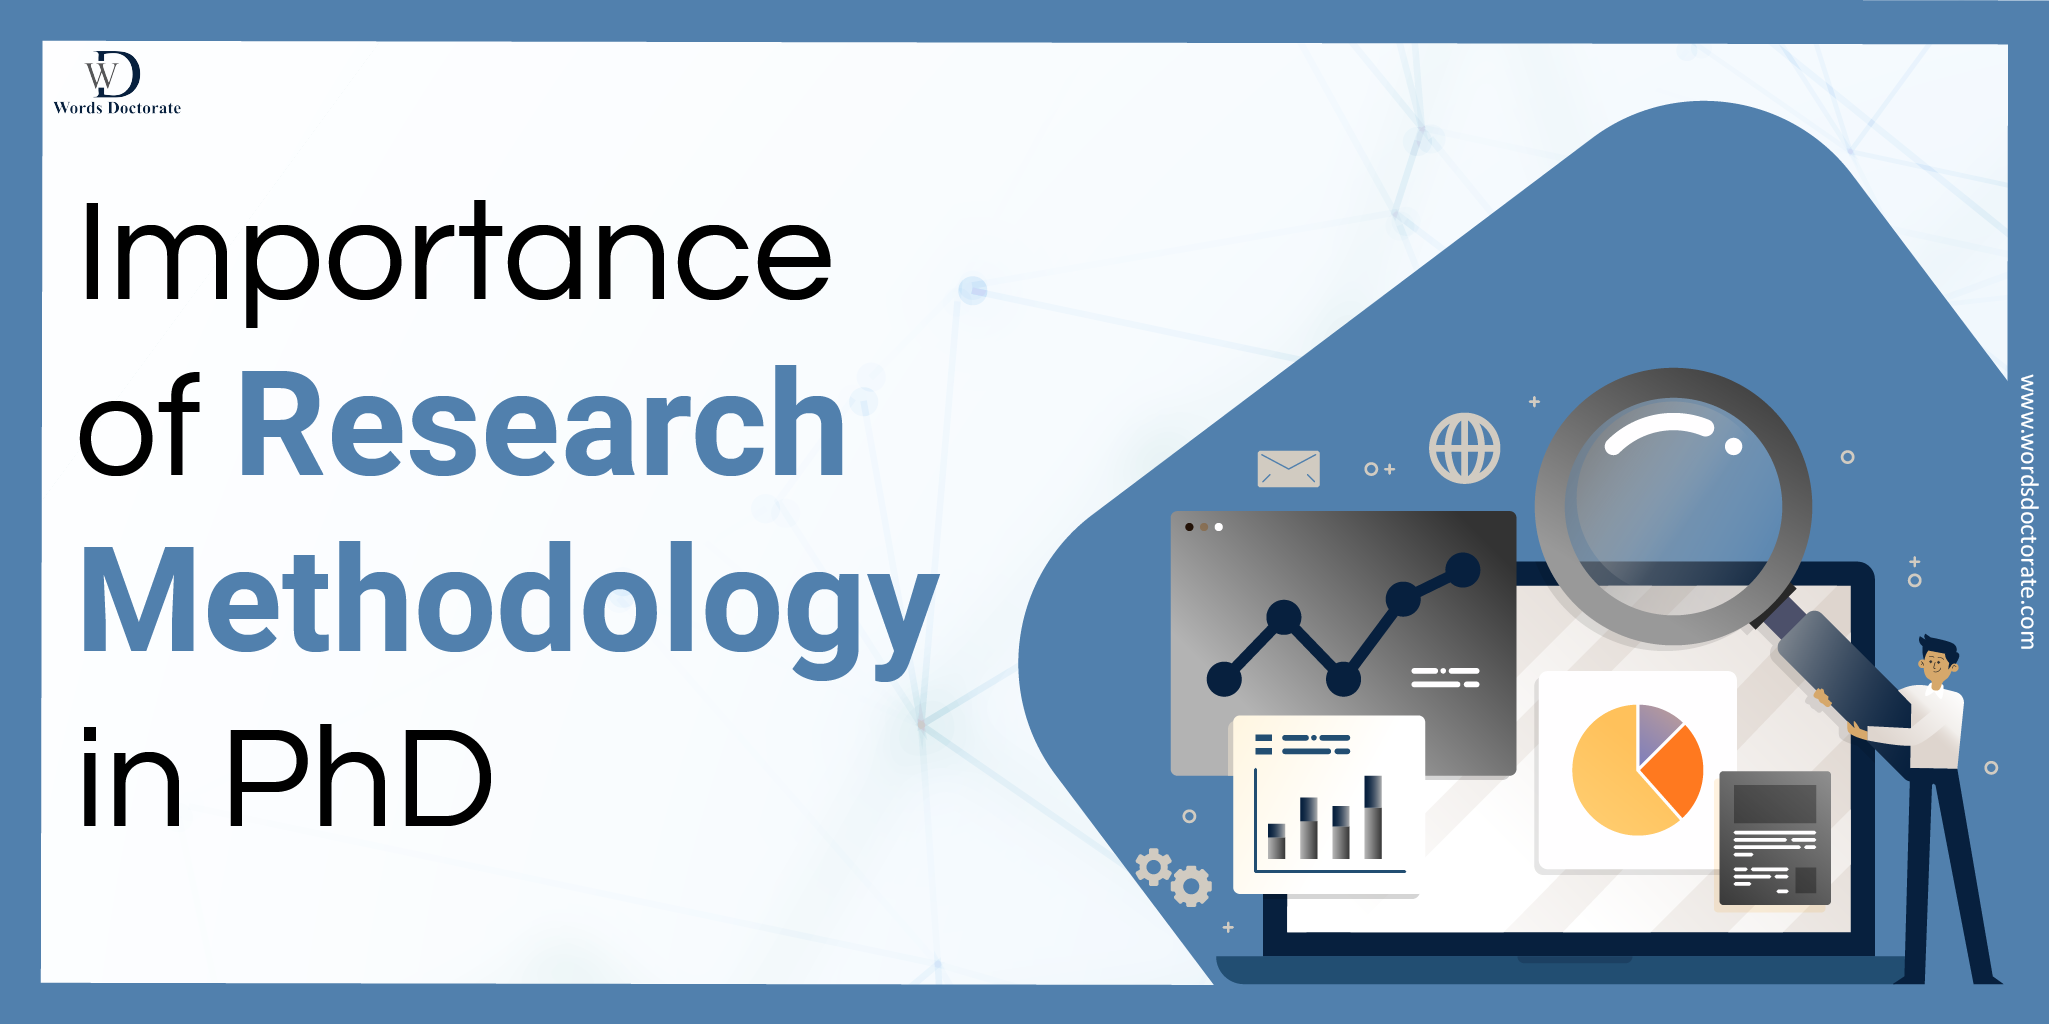 Importance of Research Methodology in PhD